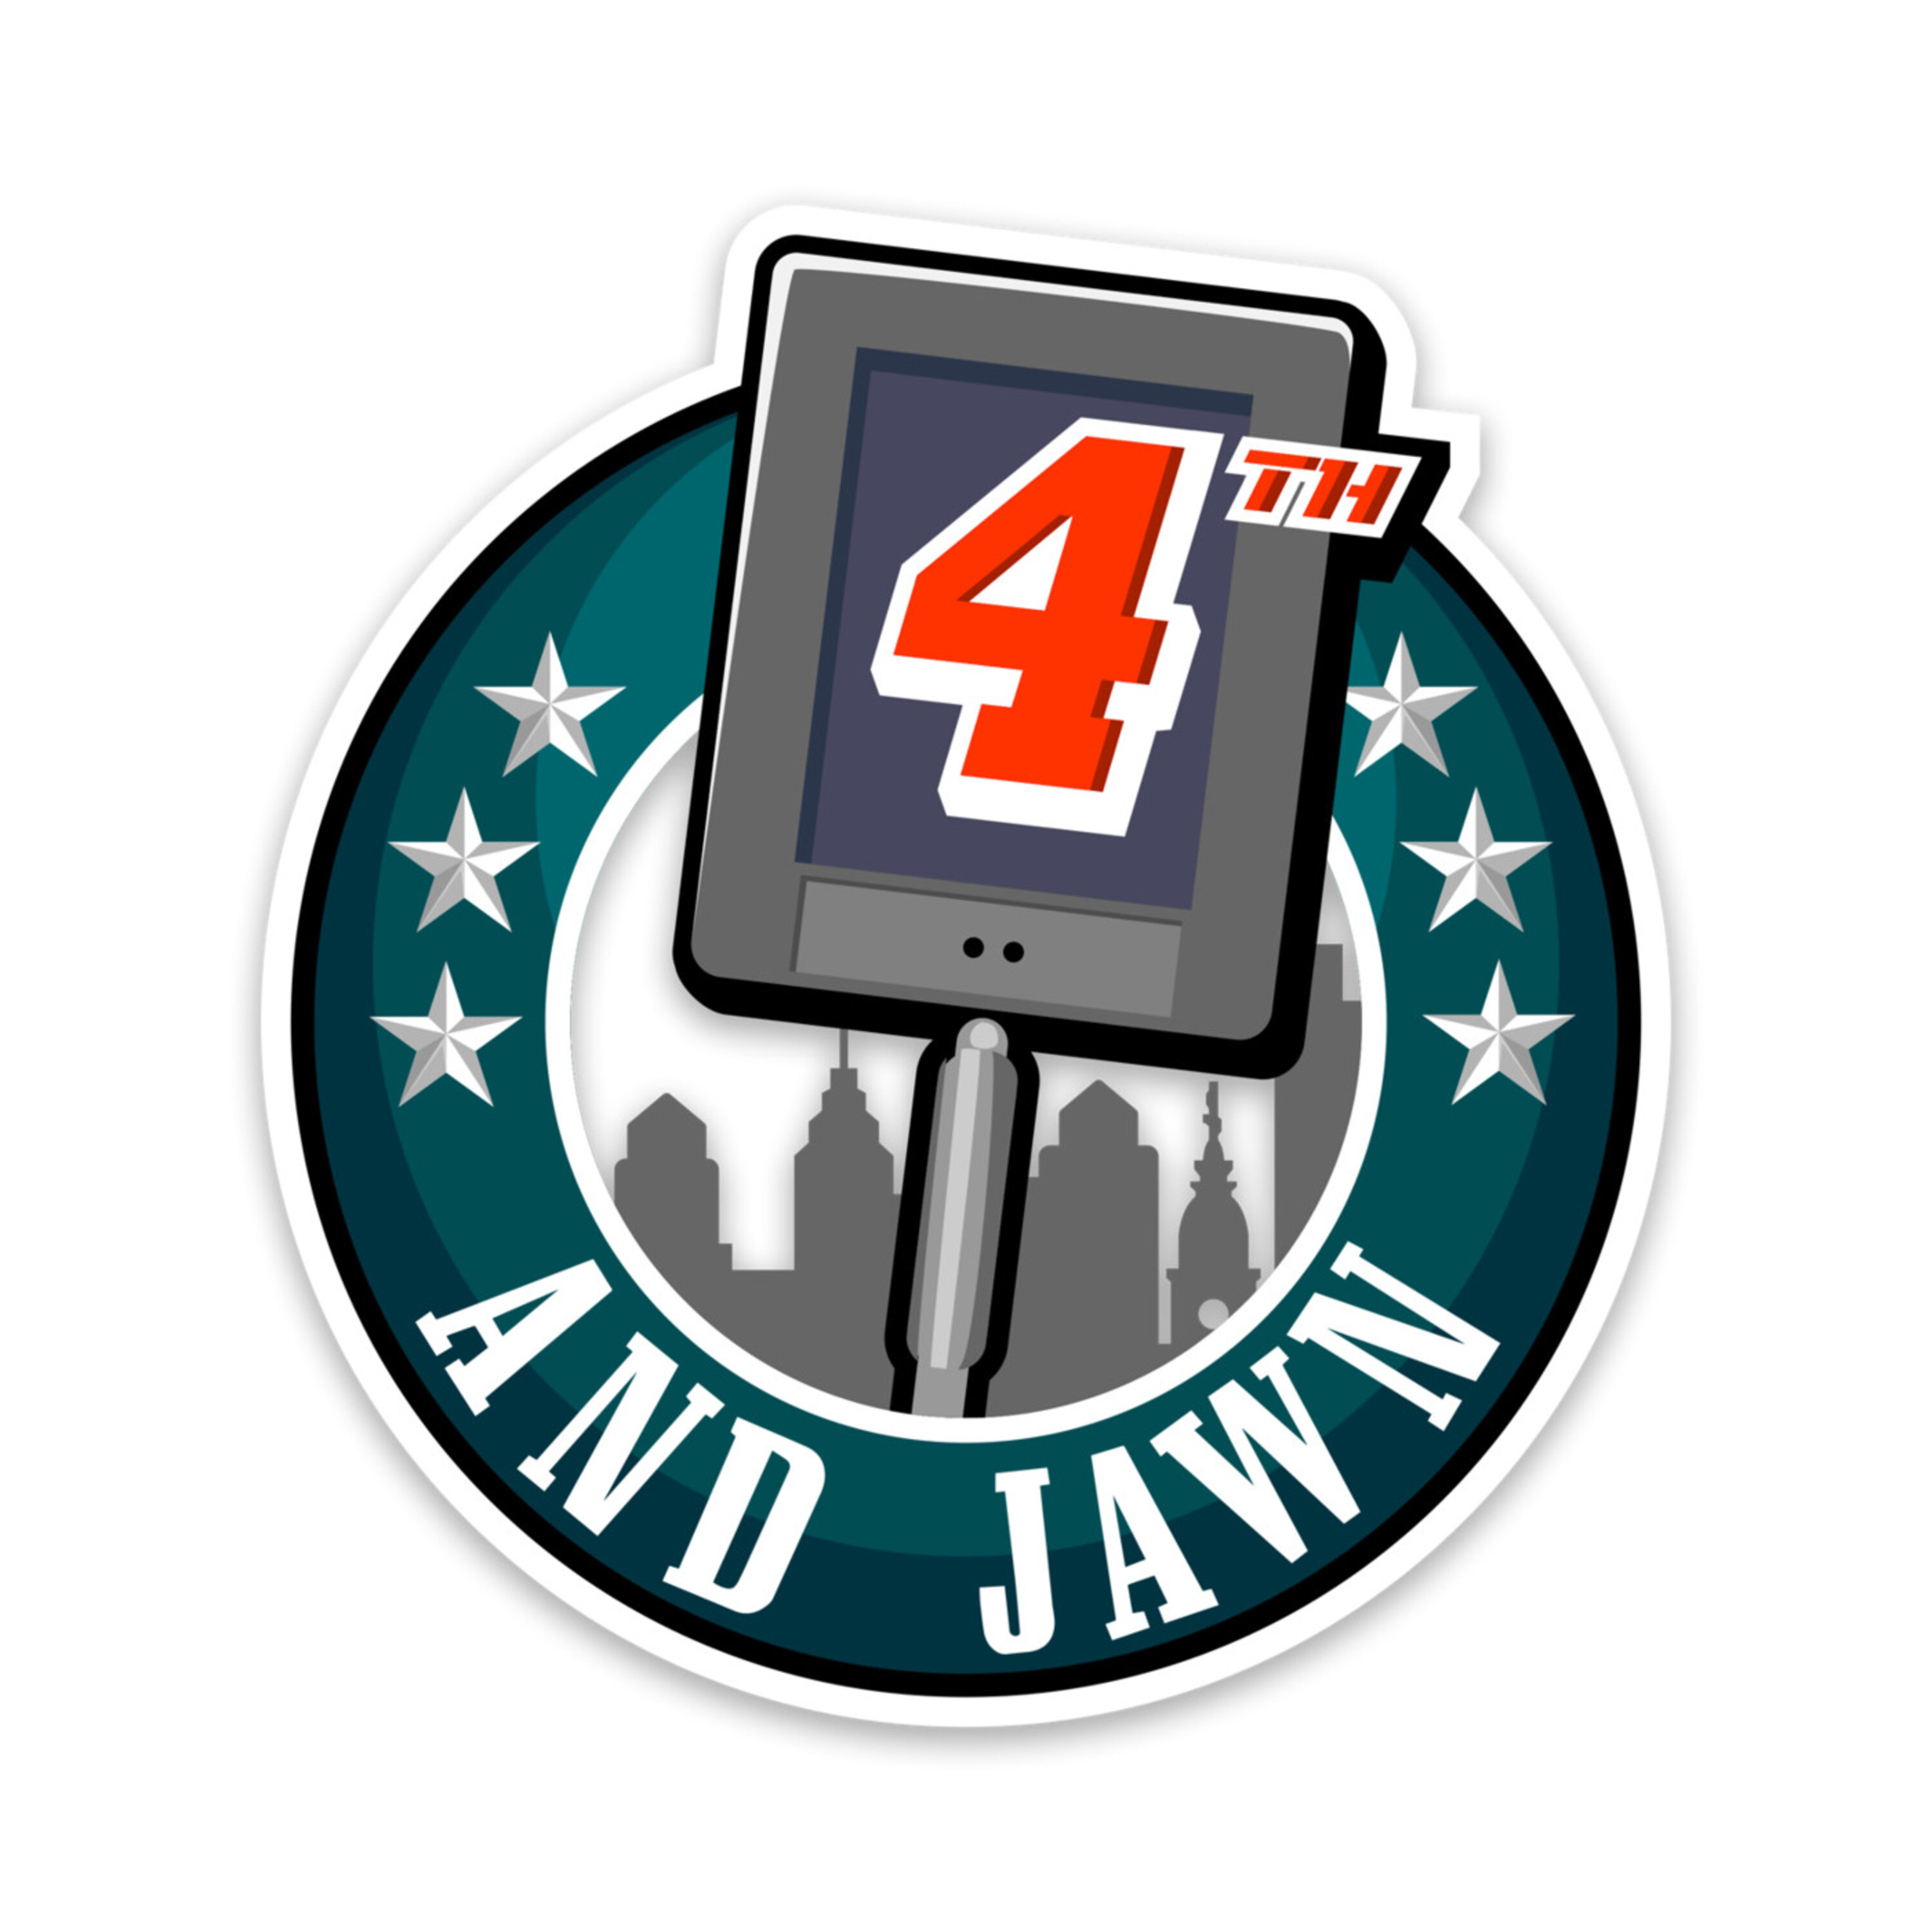 4th and Jawn - Episode 237 - Zach Ertz Gets Traded/Eagles vs. Bucs recap